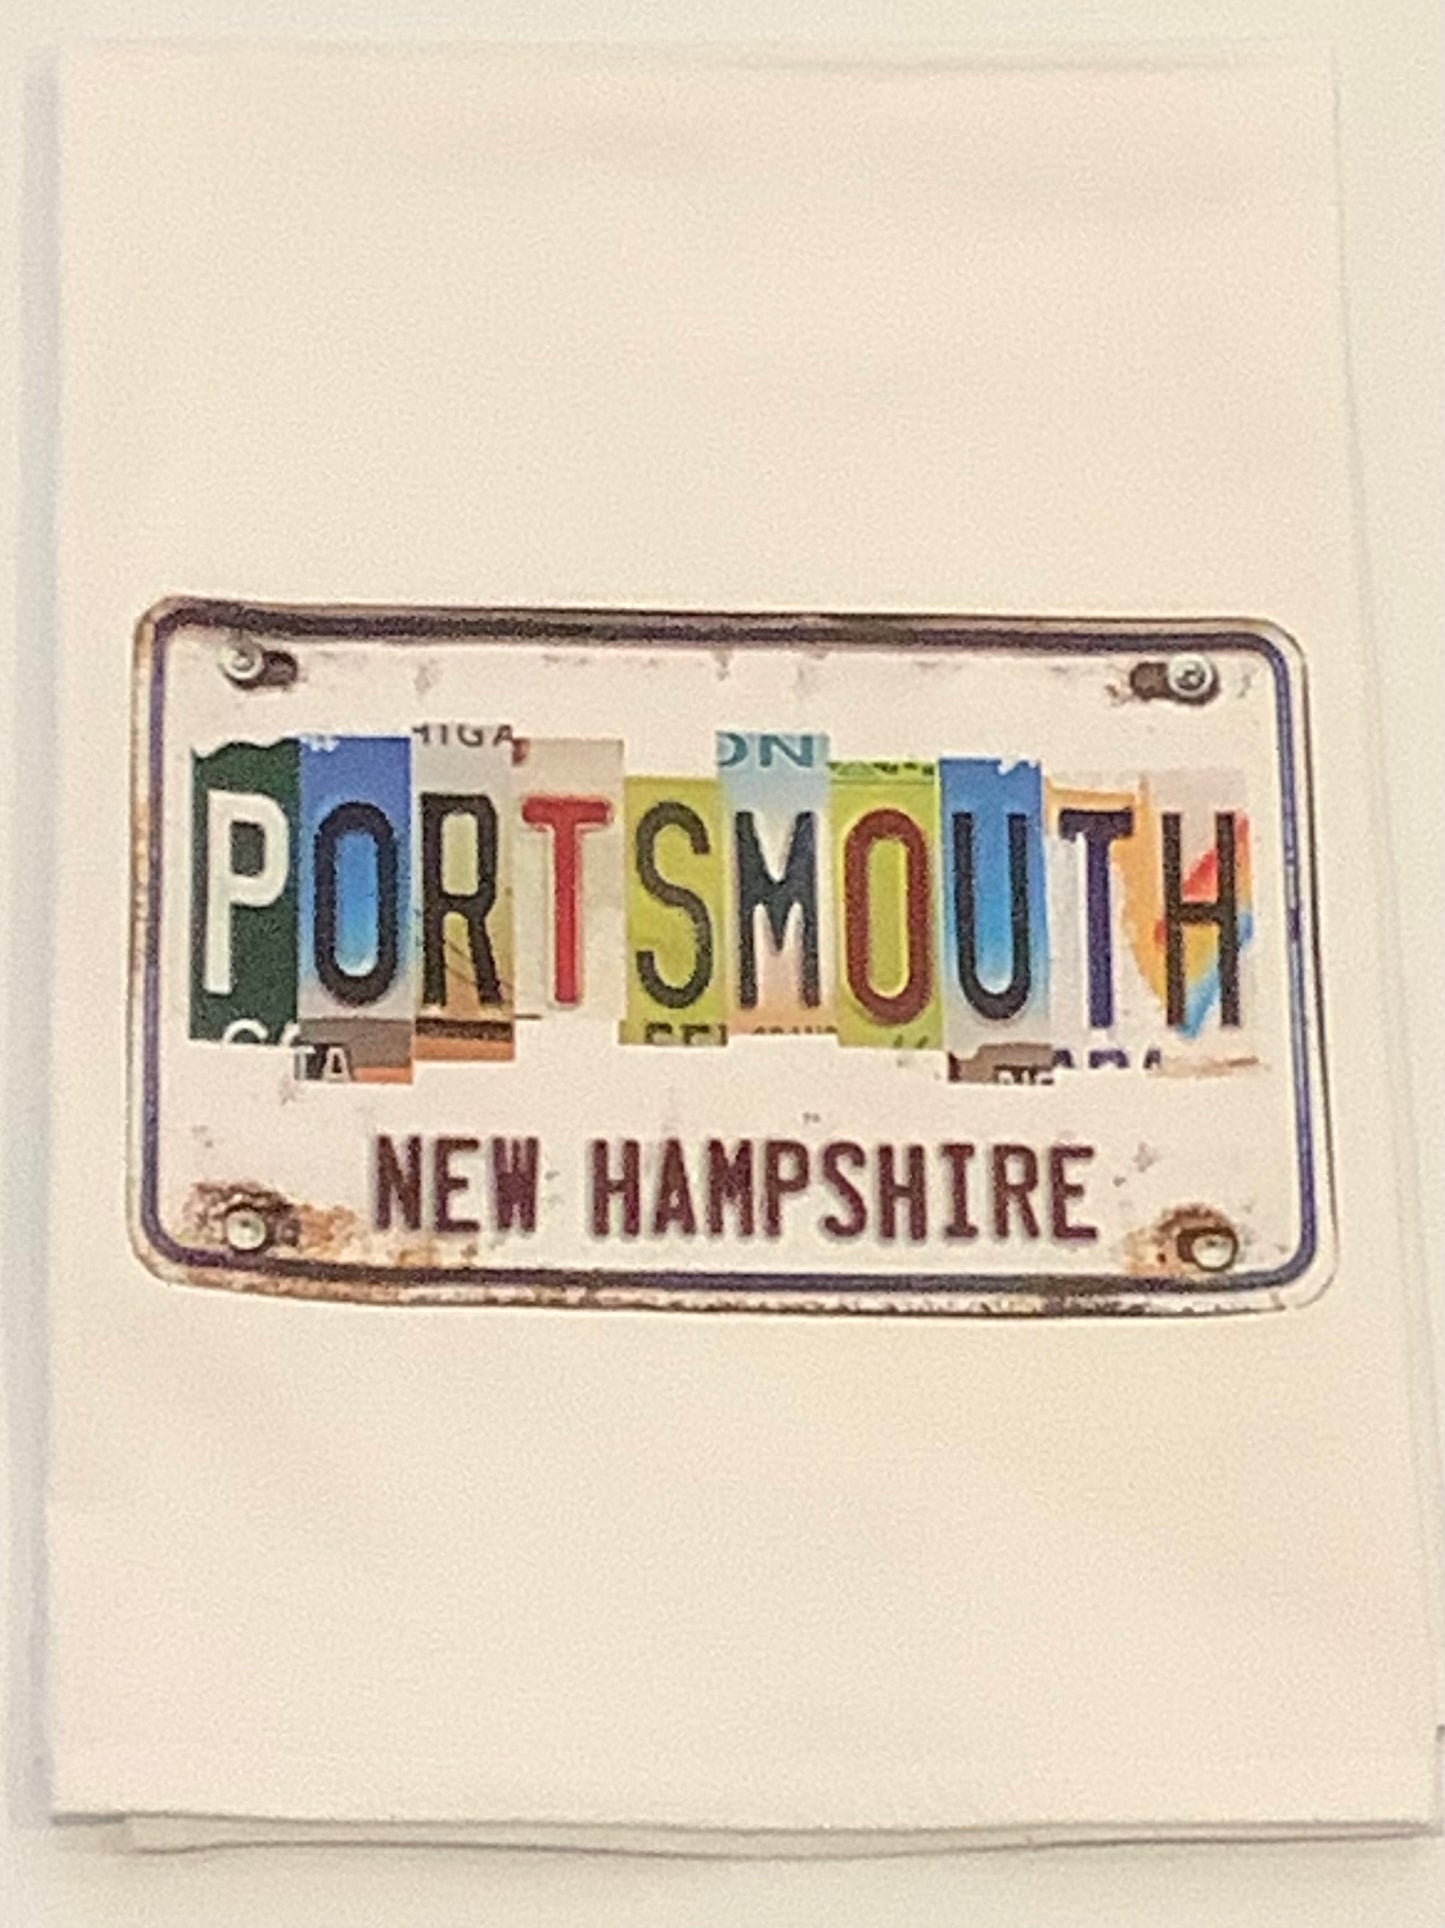 Portsmouth , New Hampshire License Plate Kitchen Towel